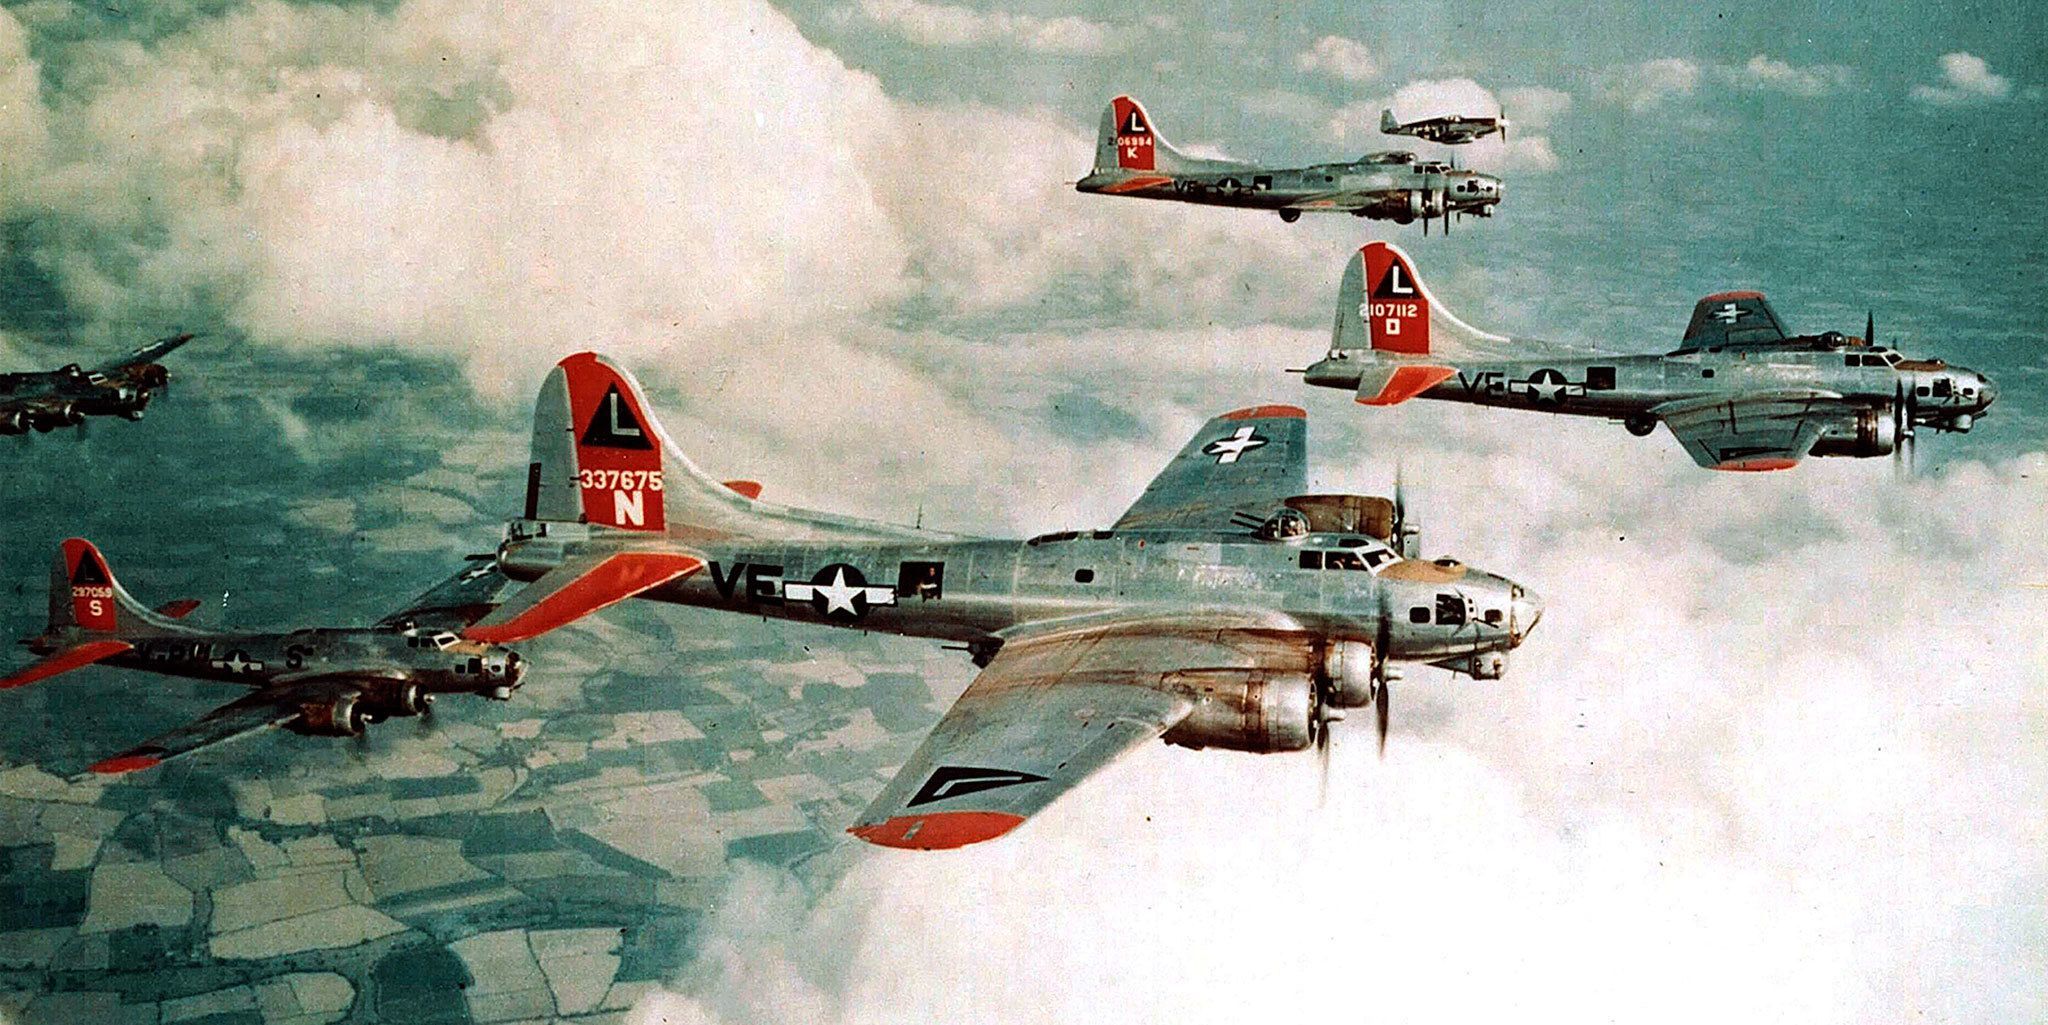 B-17G Fortresses of the 381st Bomb Group are escorted by a P-51B of the 354th Fighter Squadron in 1944. (National Archives and Records Administration)